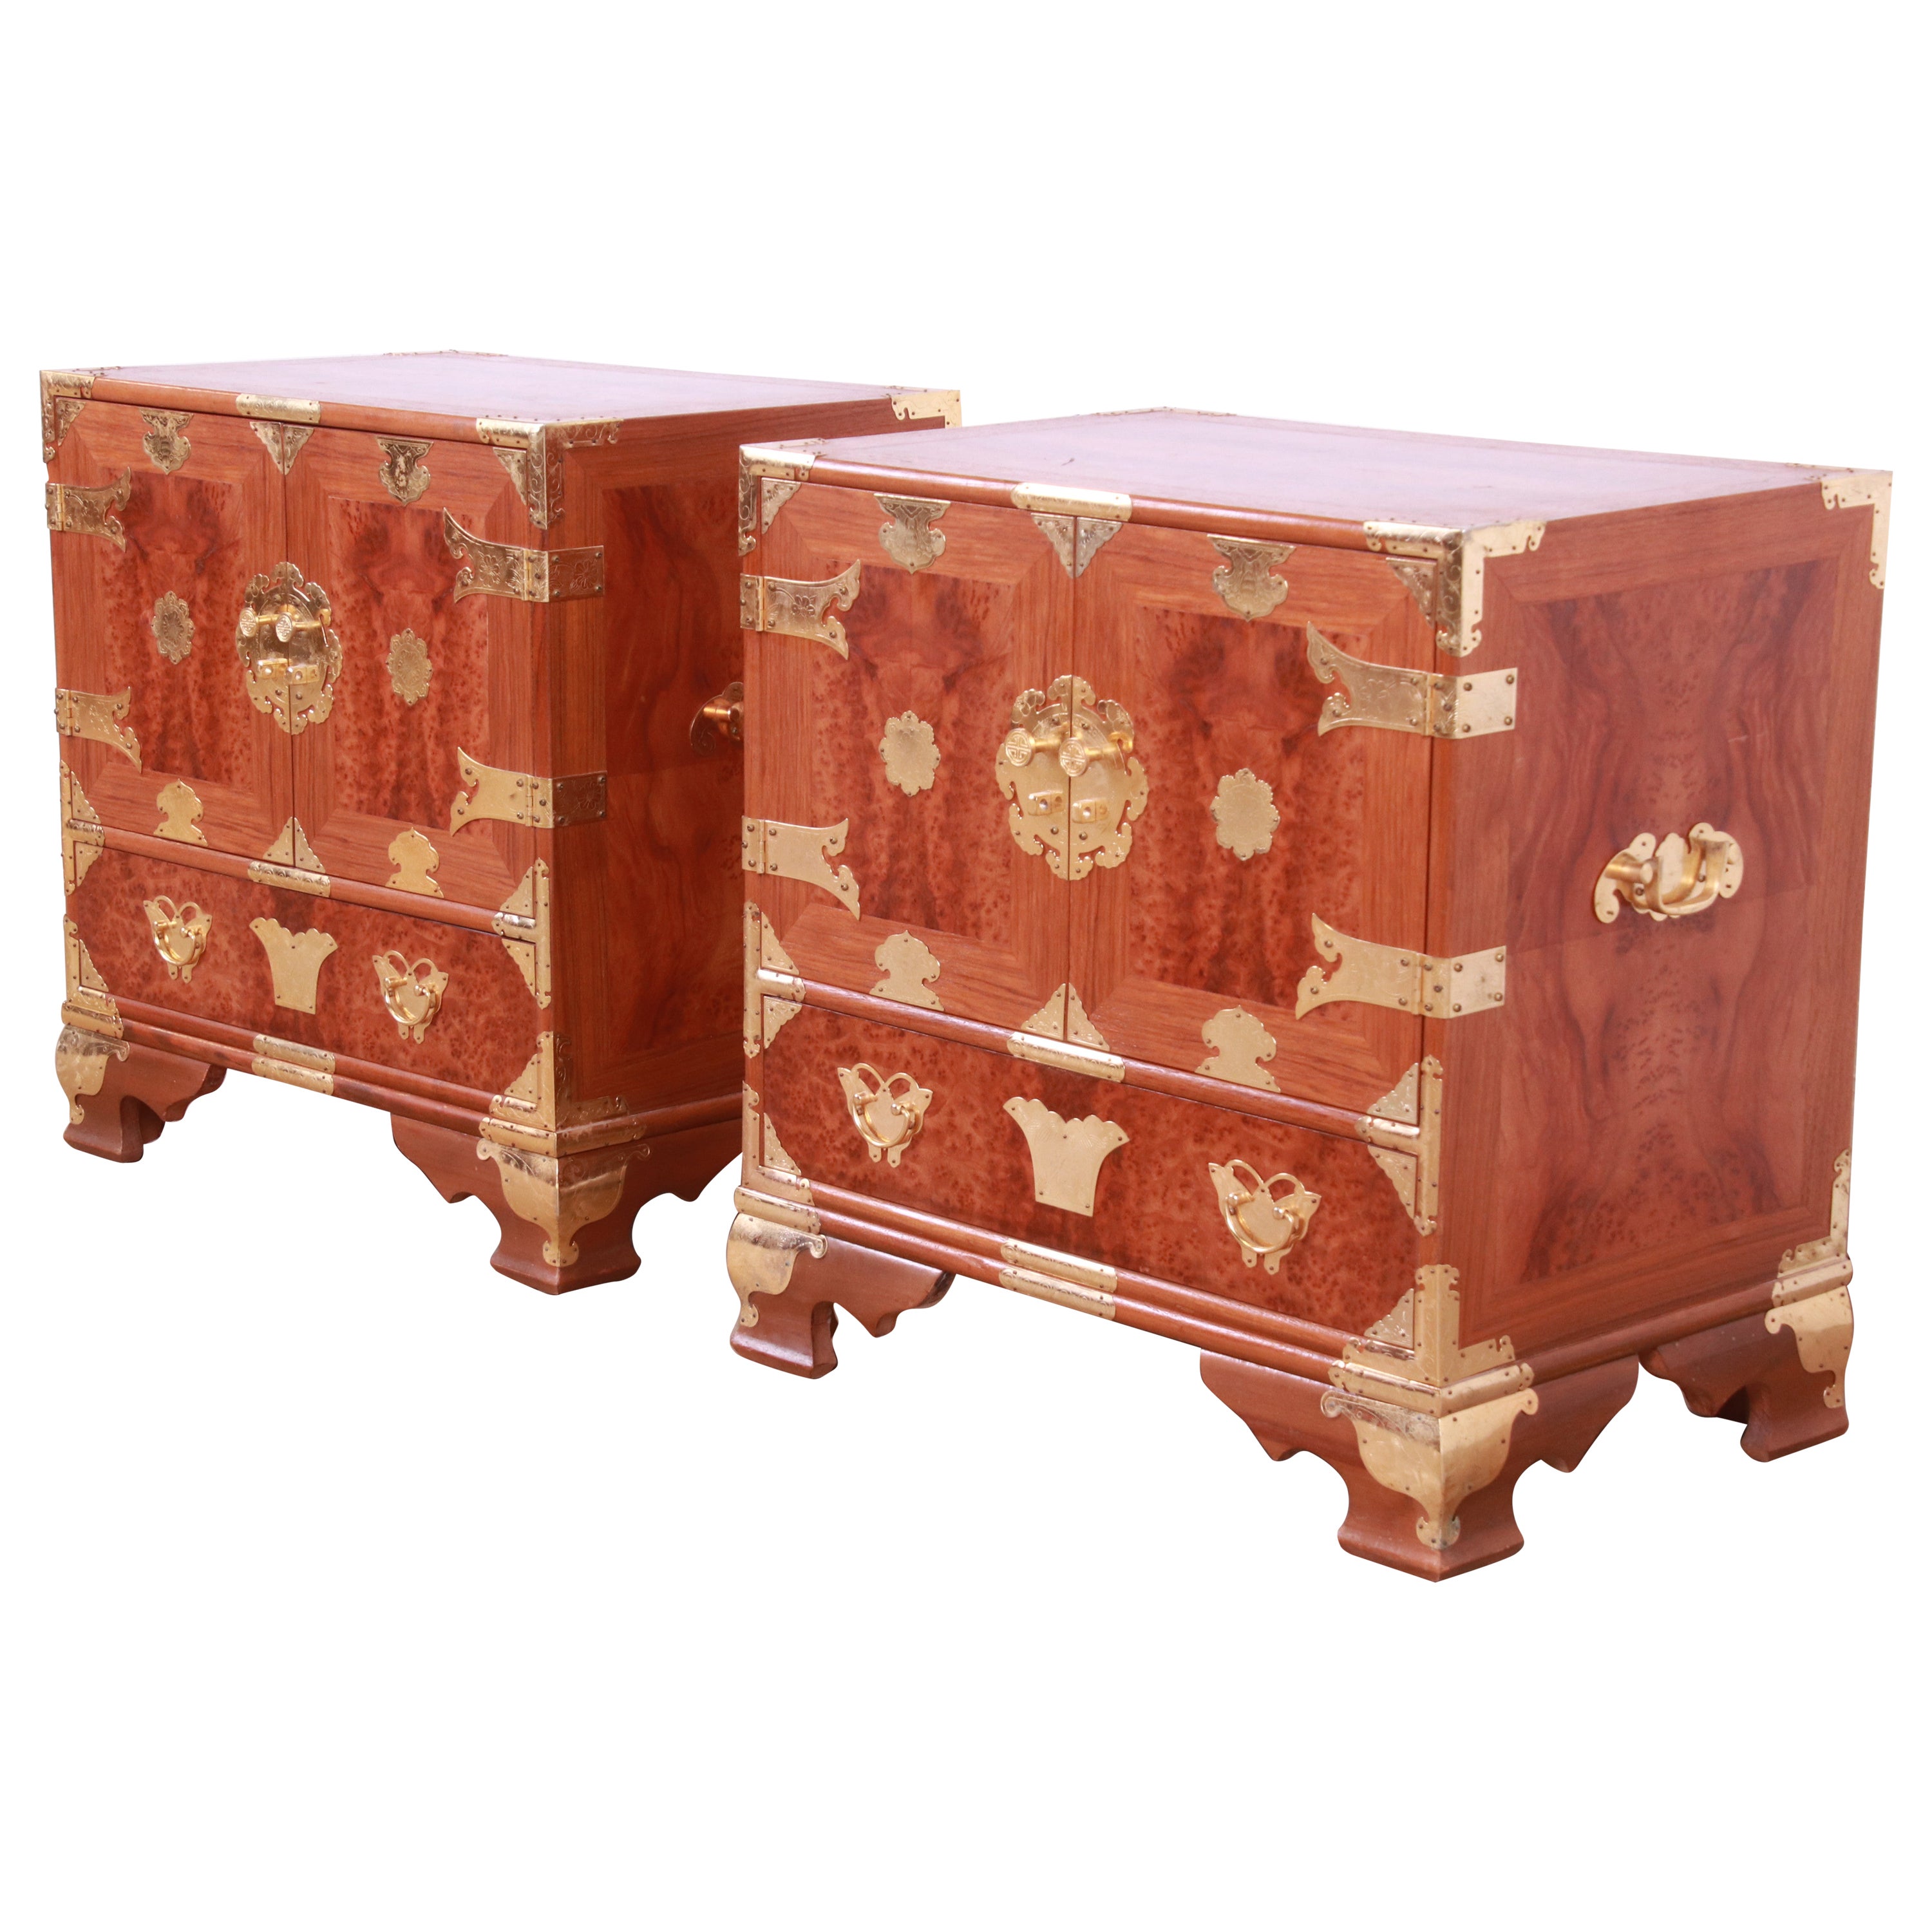 Mid-Century Hollywood Regency Chinoiserie Burl Wood and Brass Nightstands, Pair